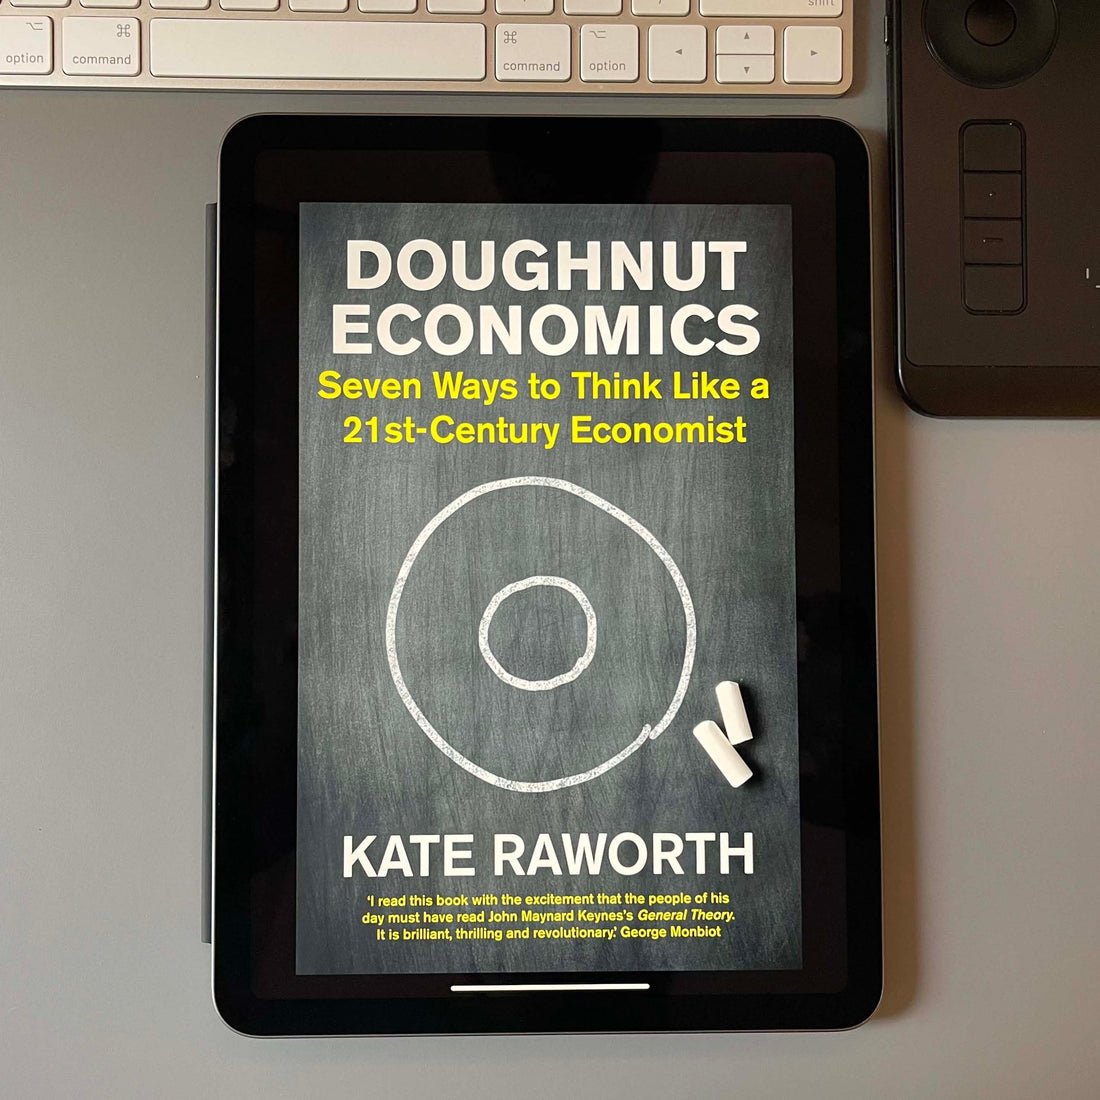 iPad with the cover of Doughnut Economics by Kate Raworth.